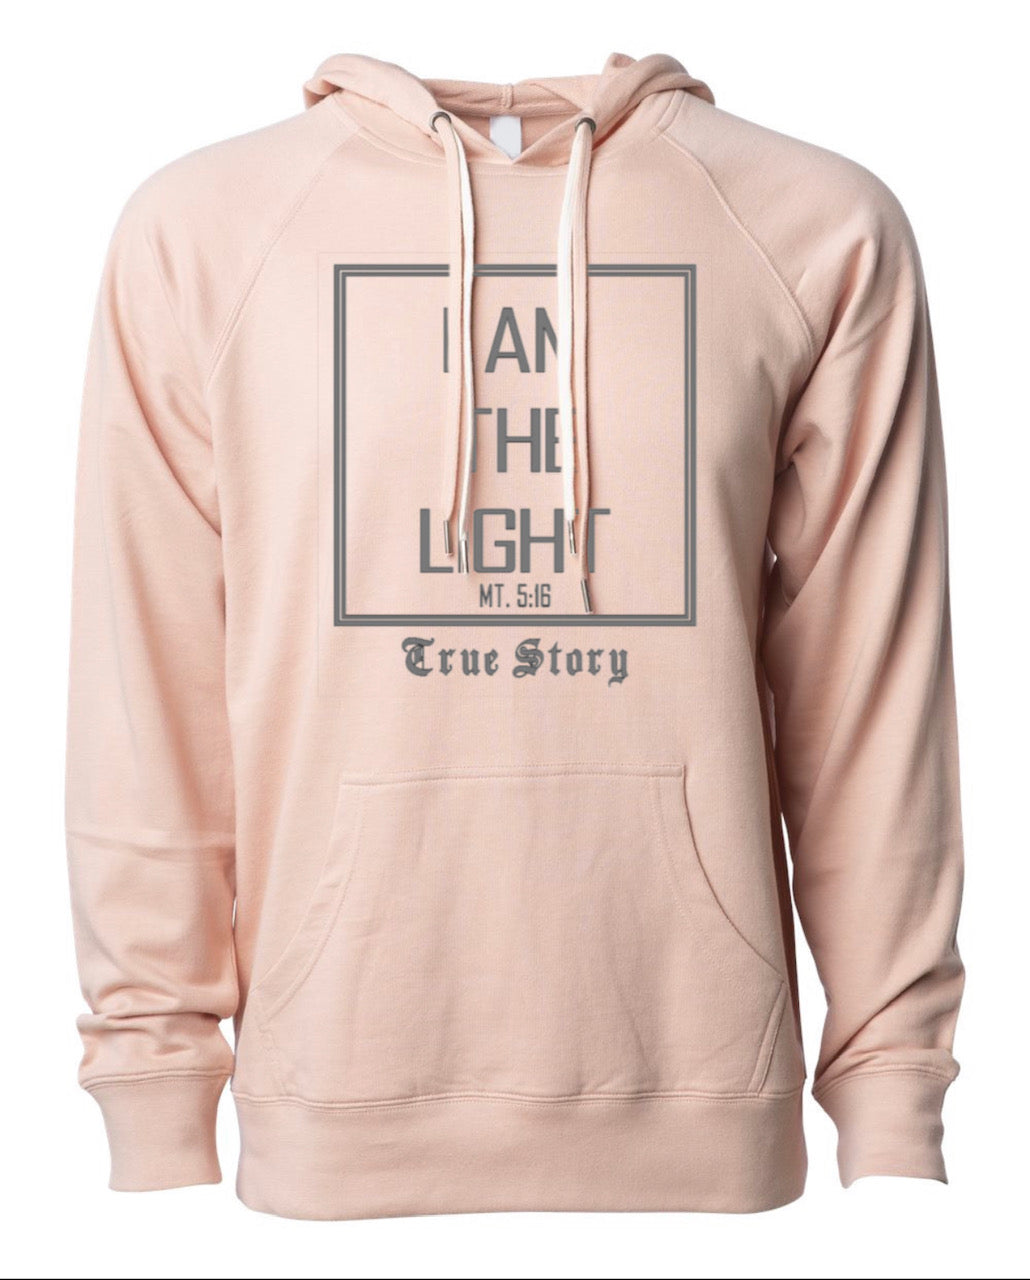 "I AM THE LIGHT"  Fitted Lightweight Rose Hoodie